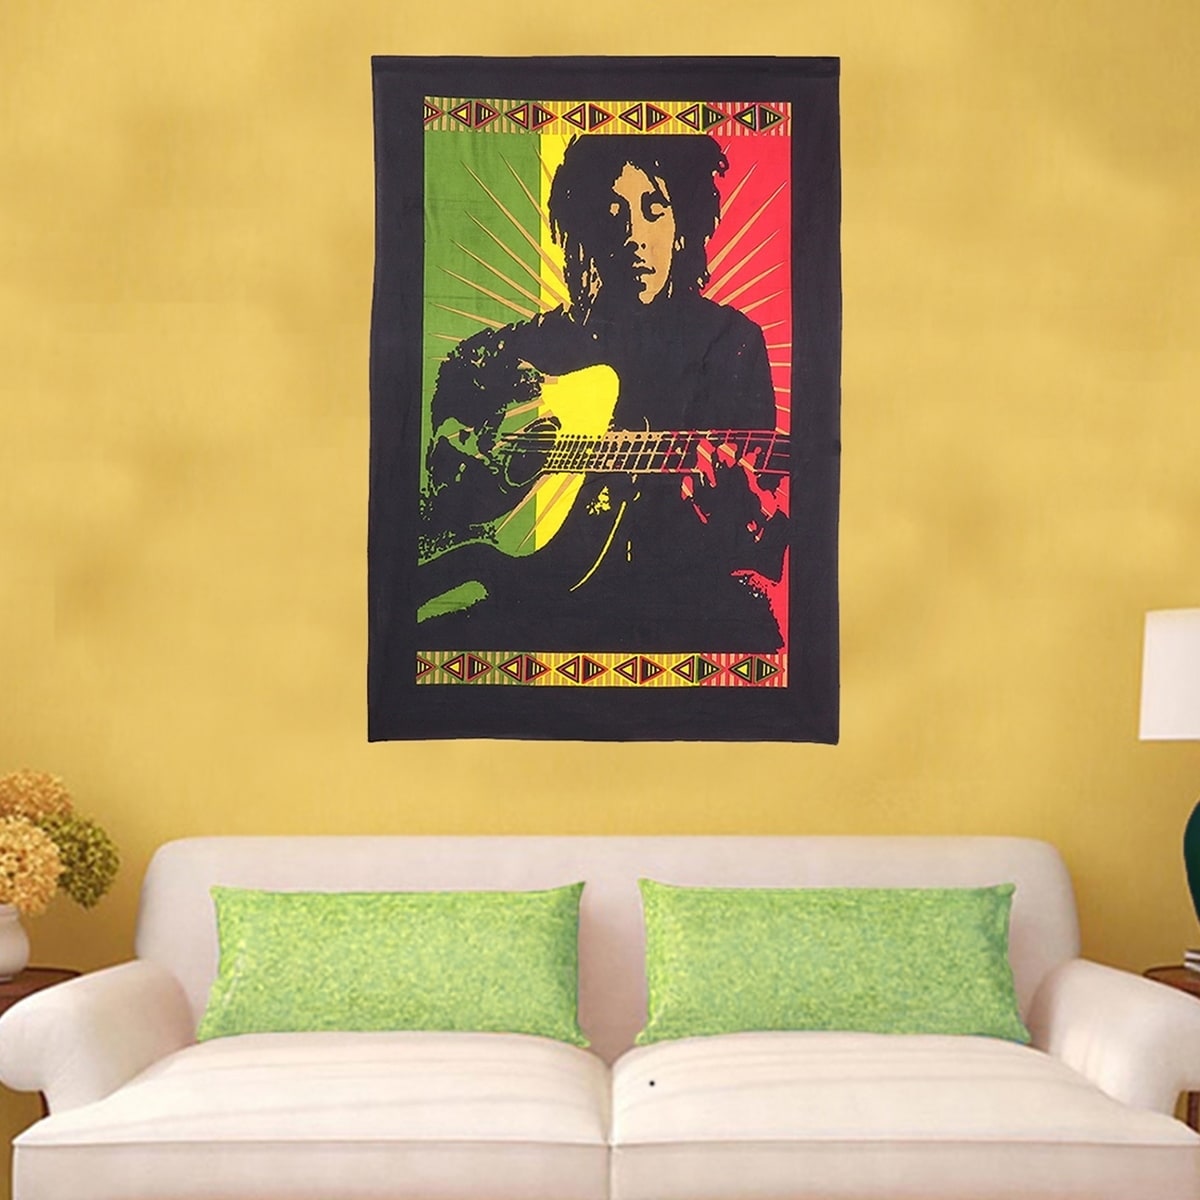 Shop Wall Decor Handmade Hanging Cotton Tapestry Bob Marley Multi Color Boho Throw Poster 30x45 Inches Overstock 21731970